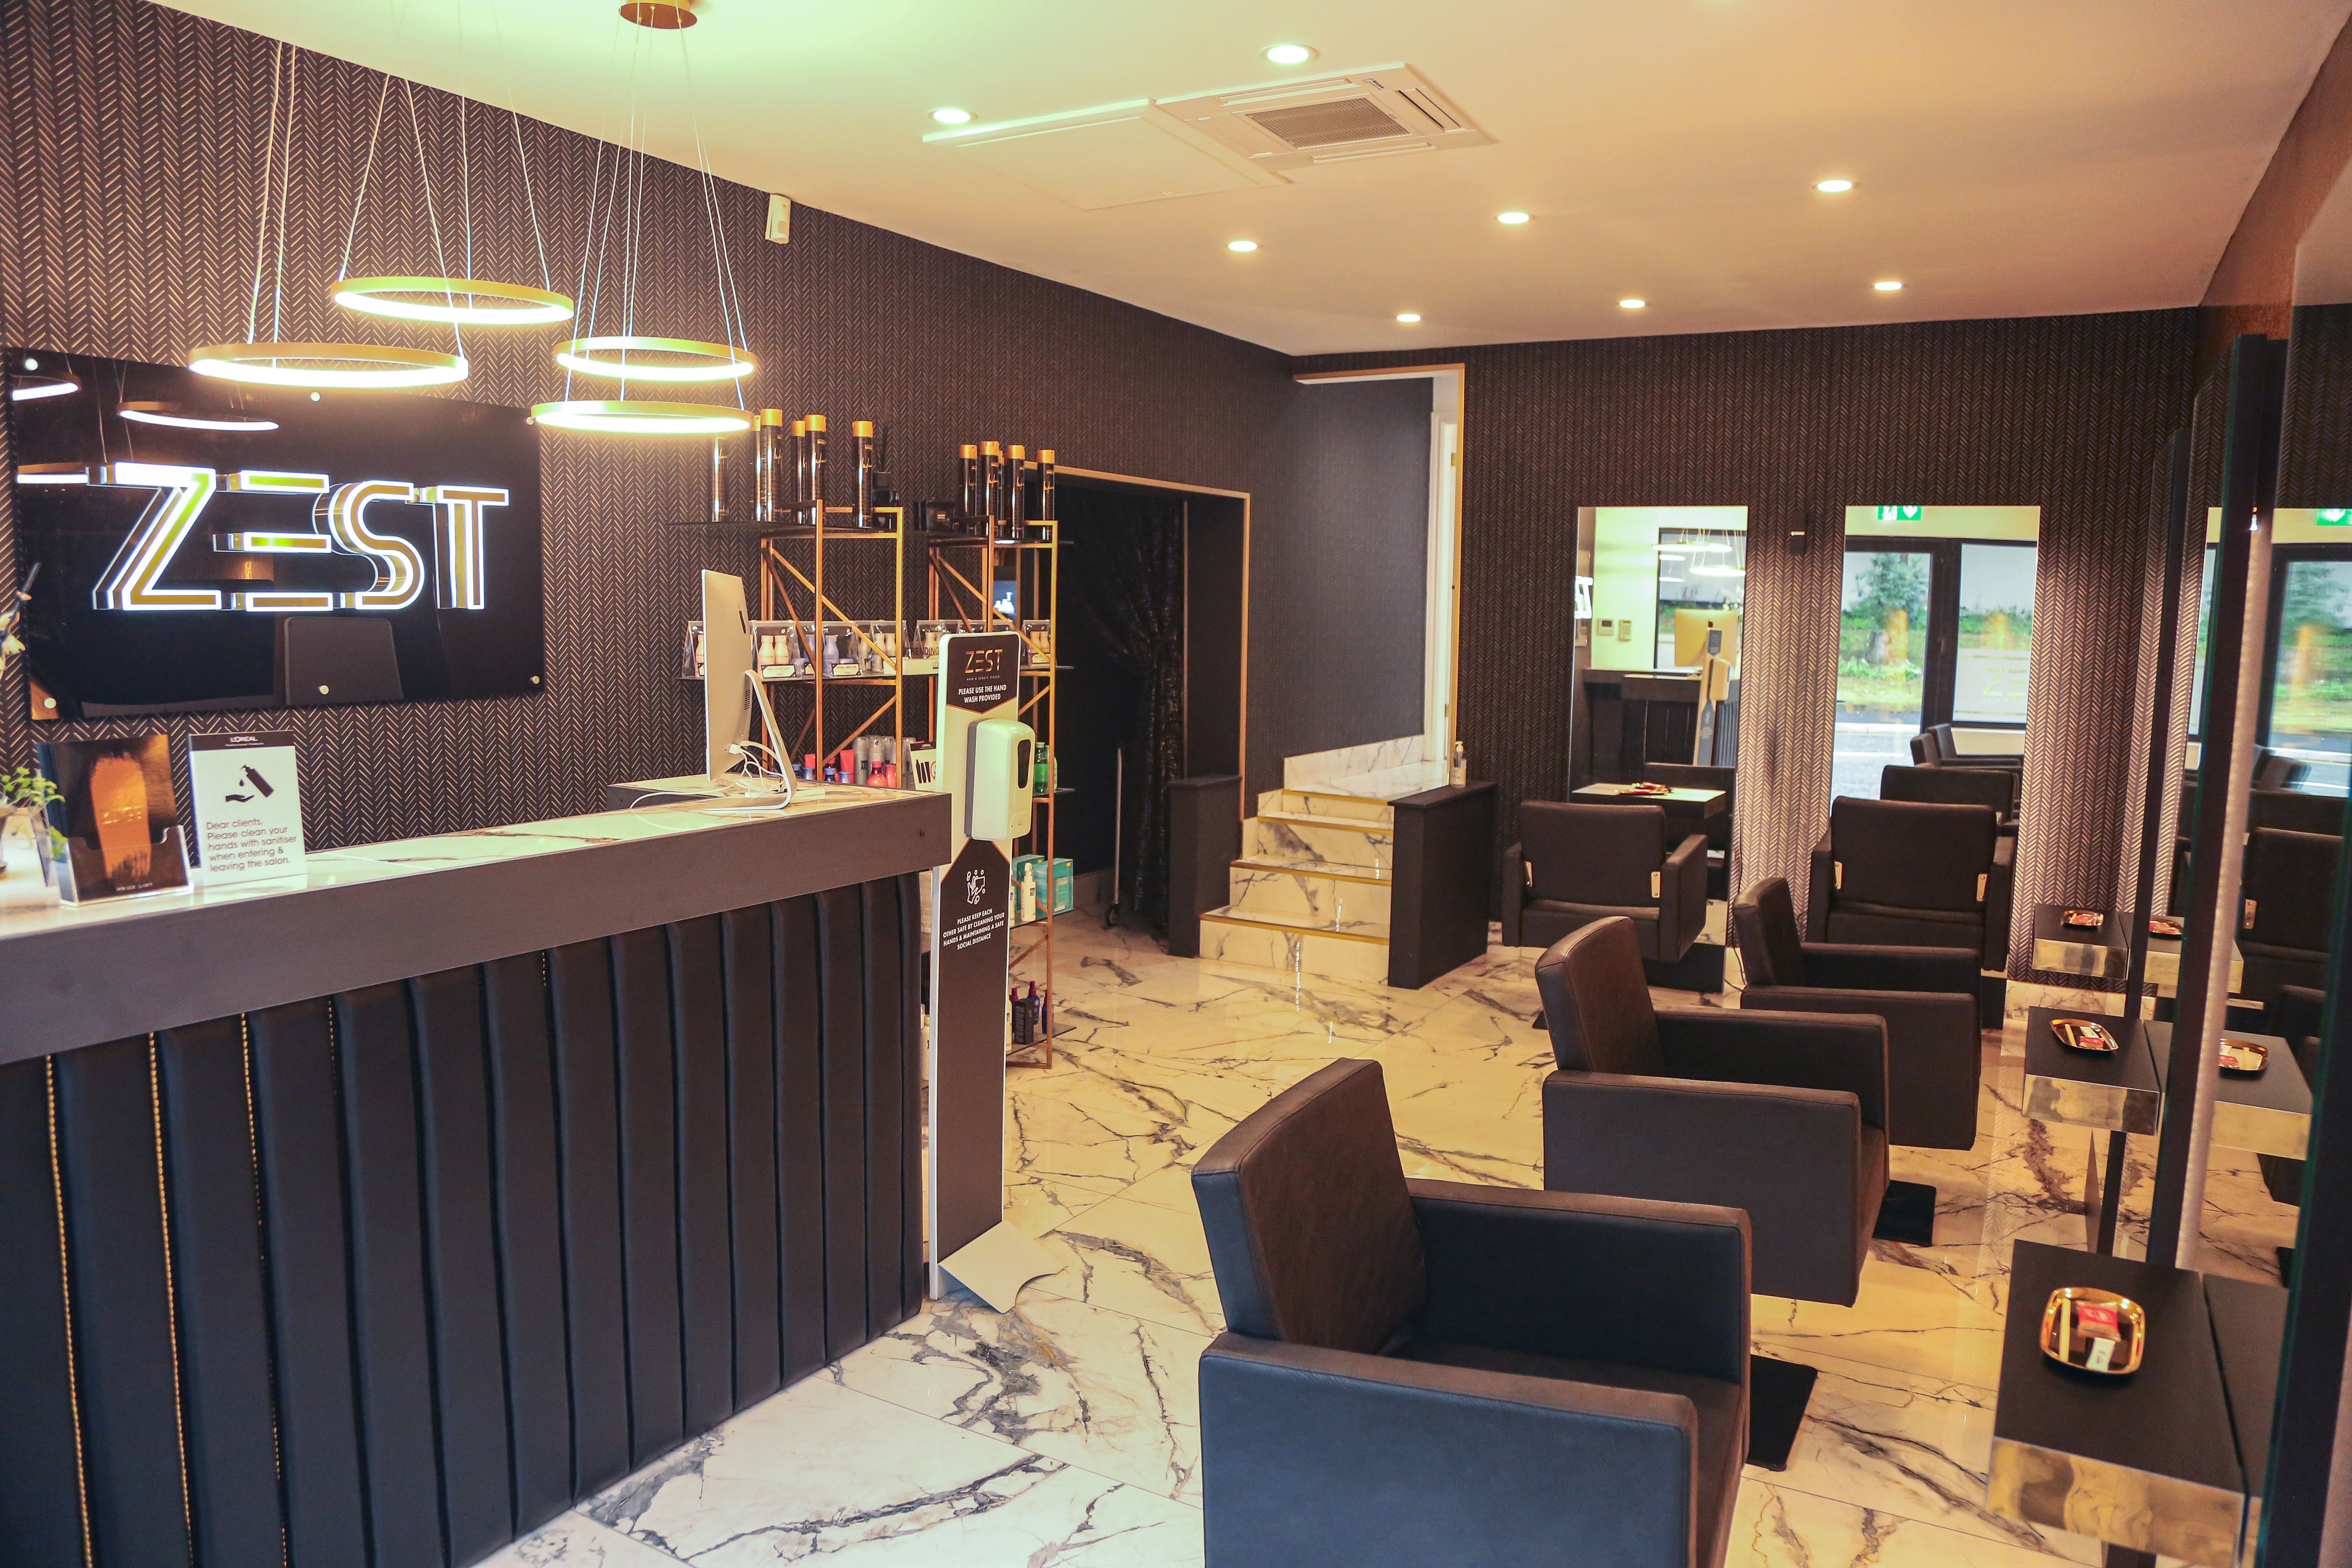 Zest is fitted out with Lotus Salon Furniture available exclusively from Salons Direct